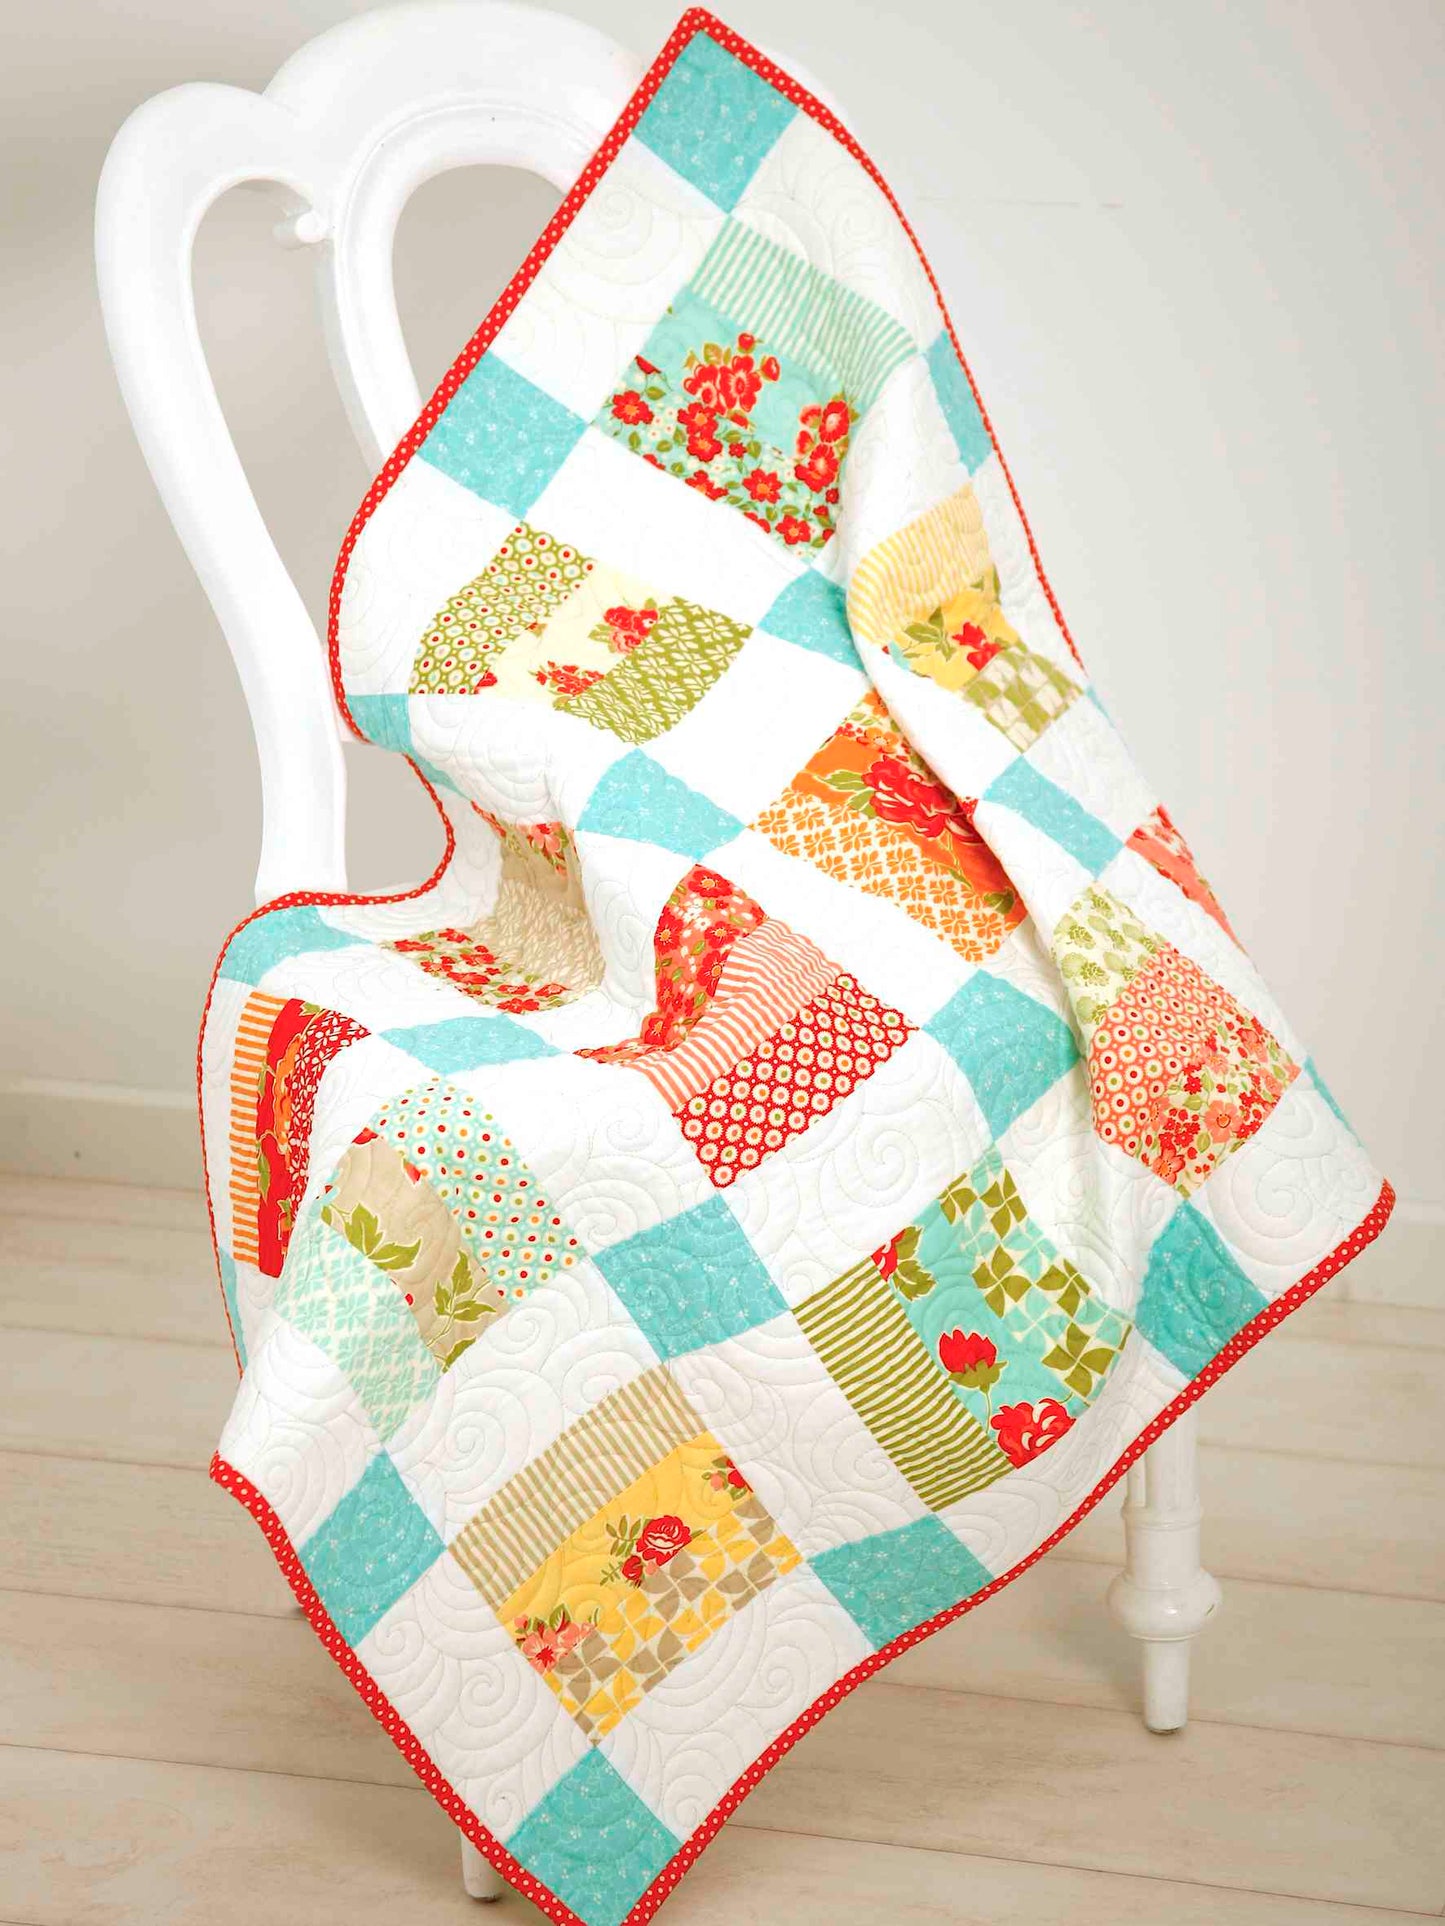 Baby Quilt Pattern PDF Download. Suitable for Beginner quilters, easy piecing with easy to follow instructions and diagrams.